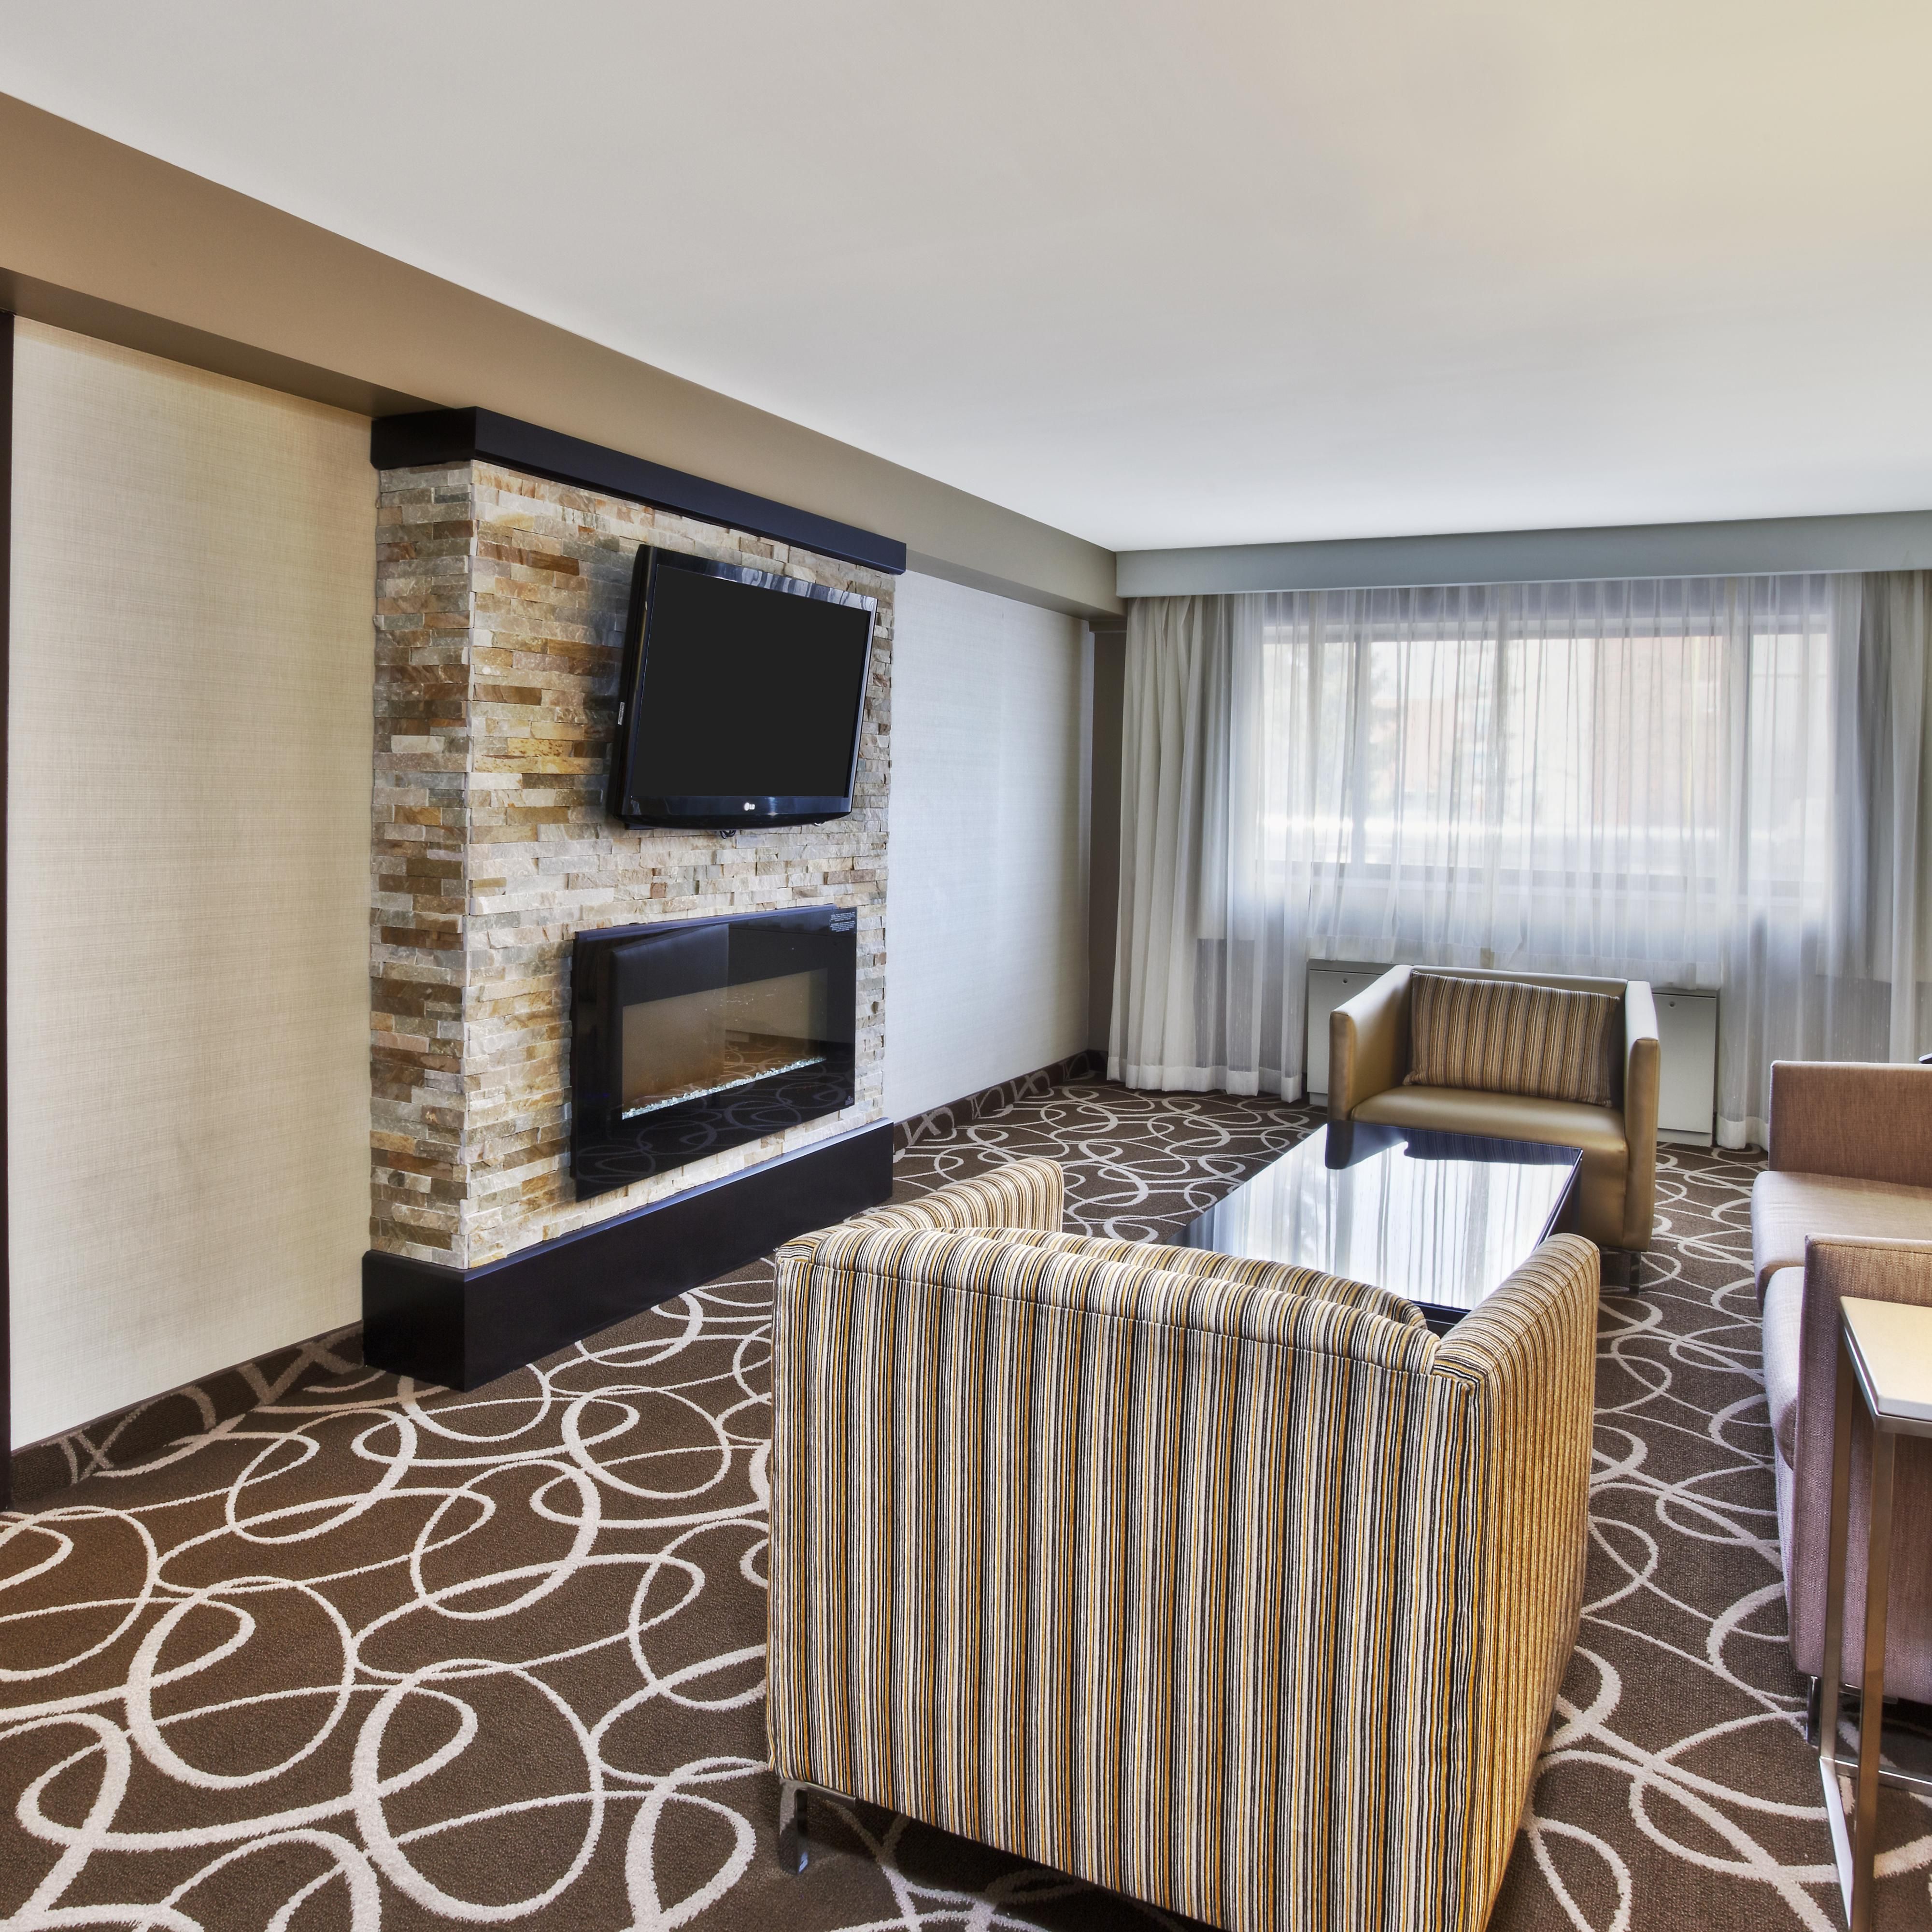 Indulge yourself in our warm, welcoming suites